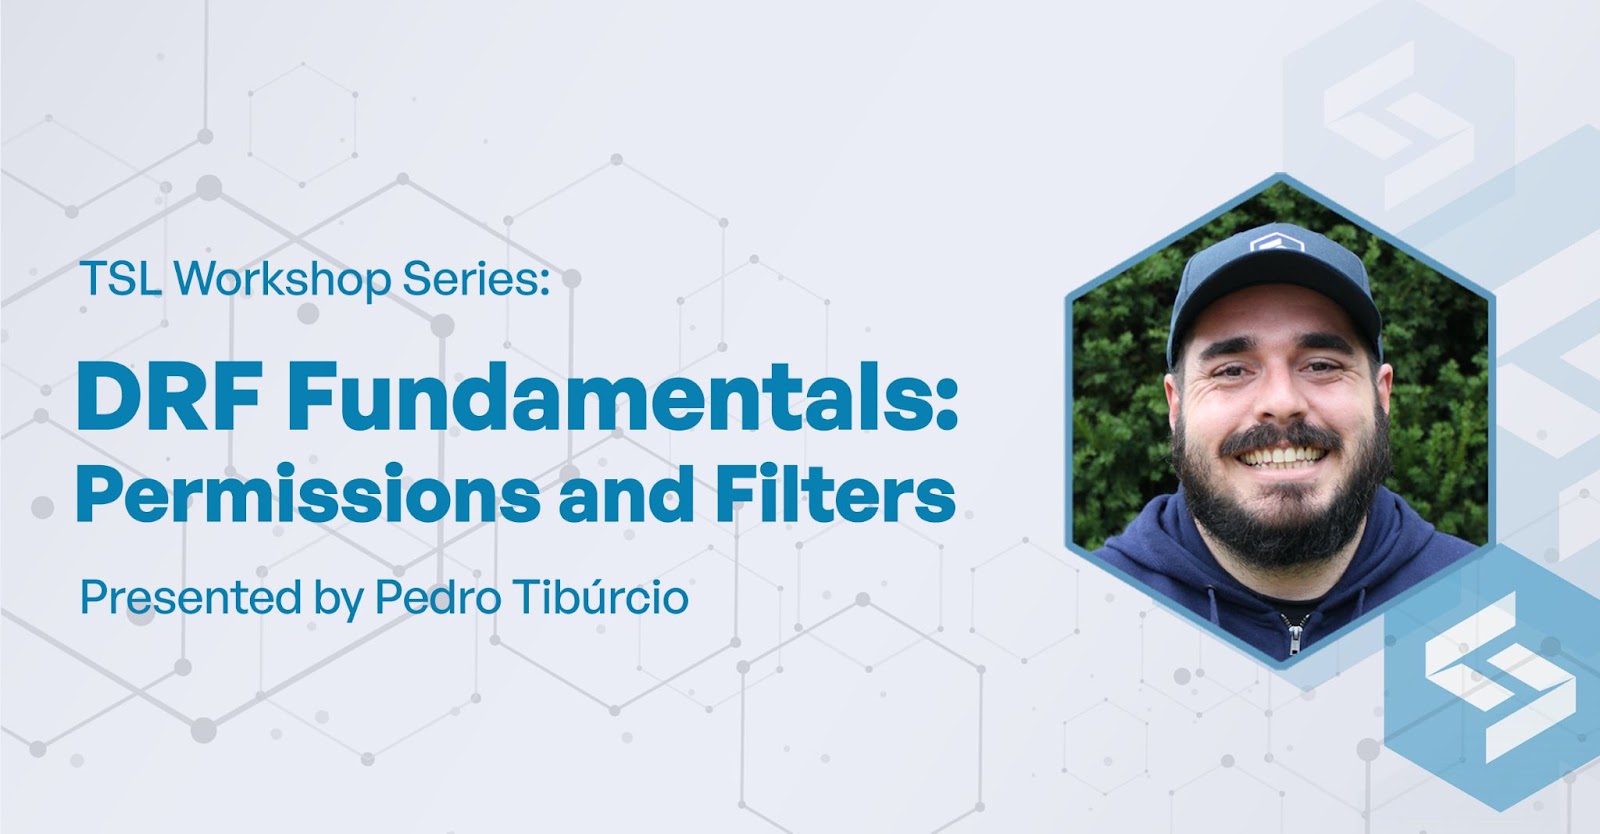 DRF Fundamentals: Permissions and Filters